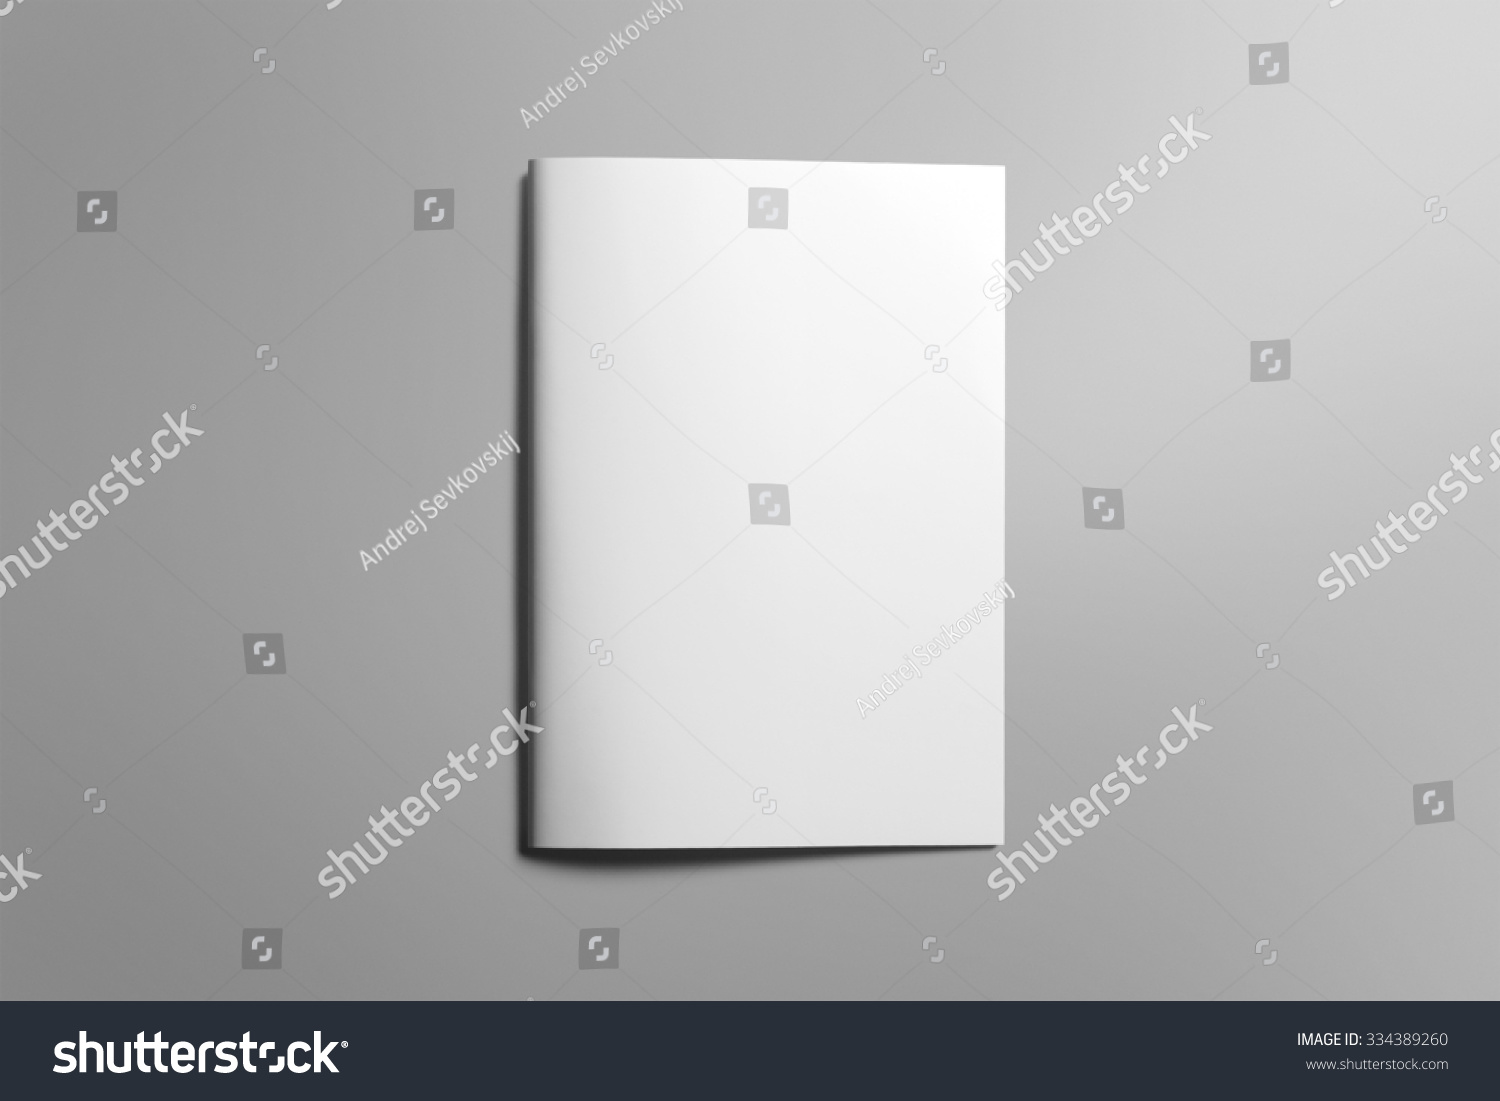 Blank portrait A4, US-Letter, brochure magazine isolated on gray, with clipping path, changeable background #334389260